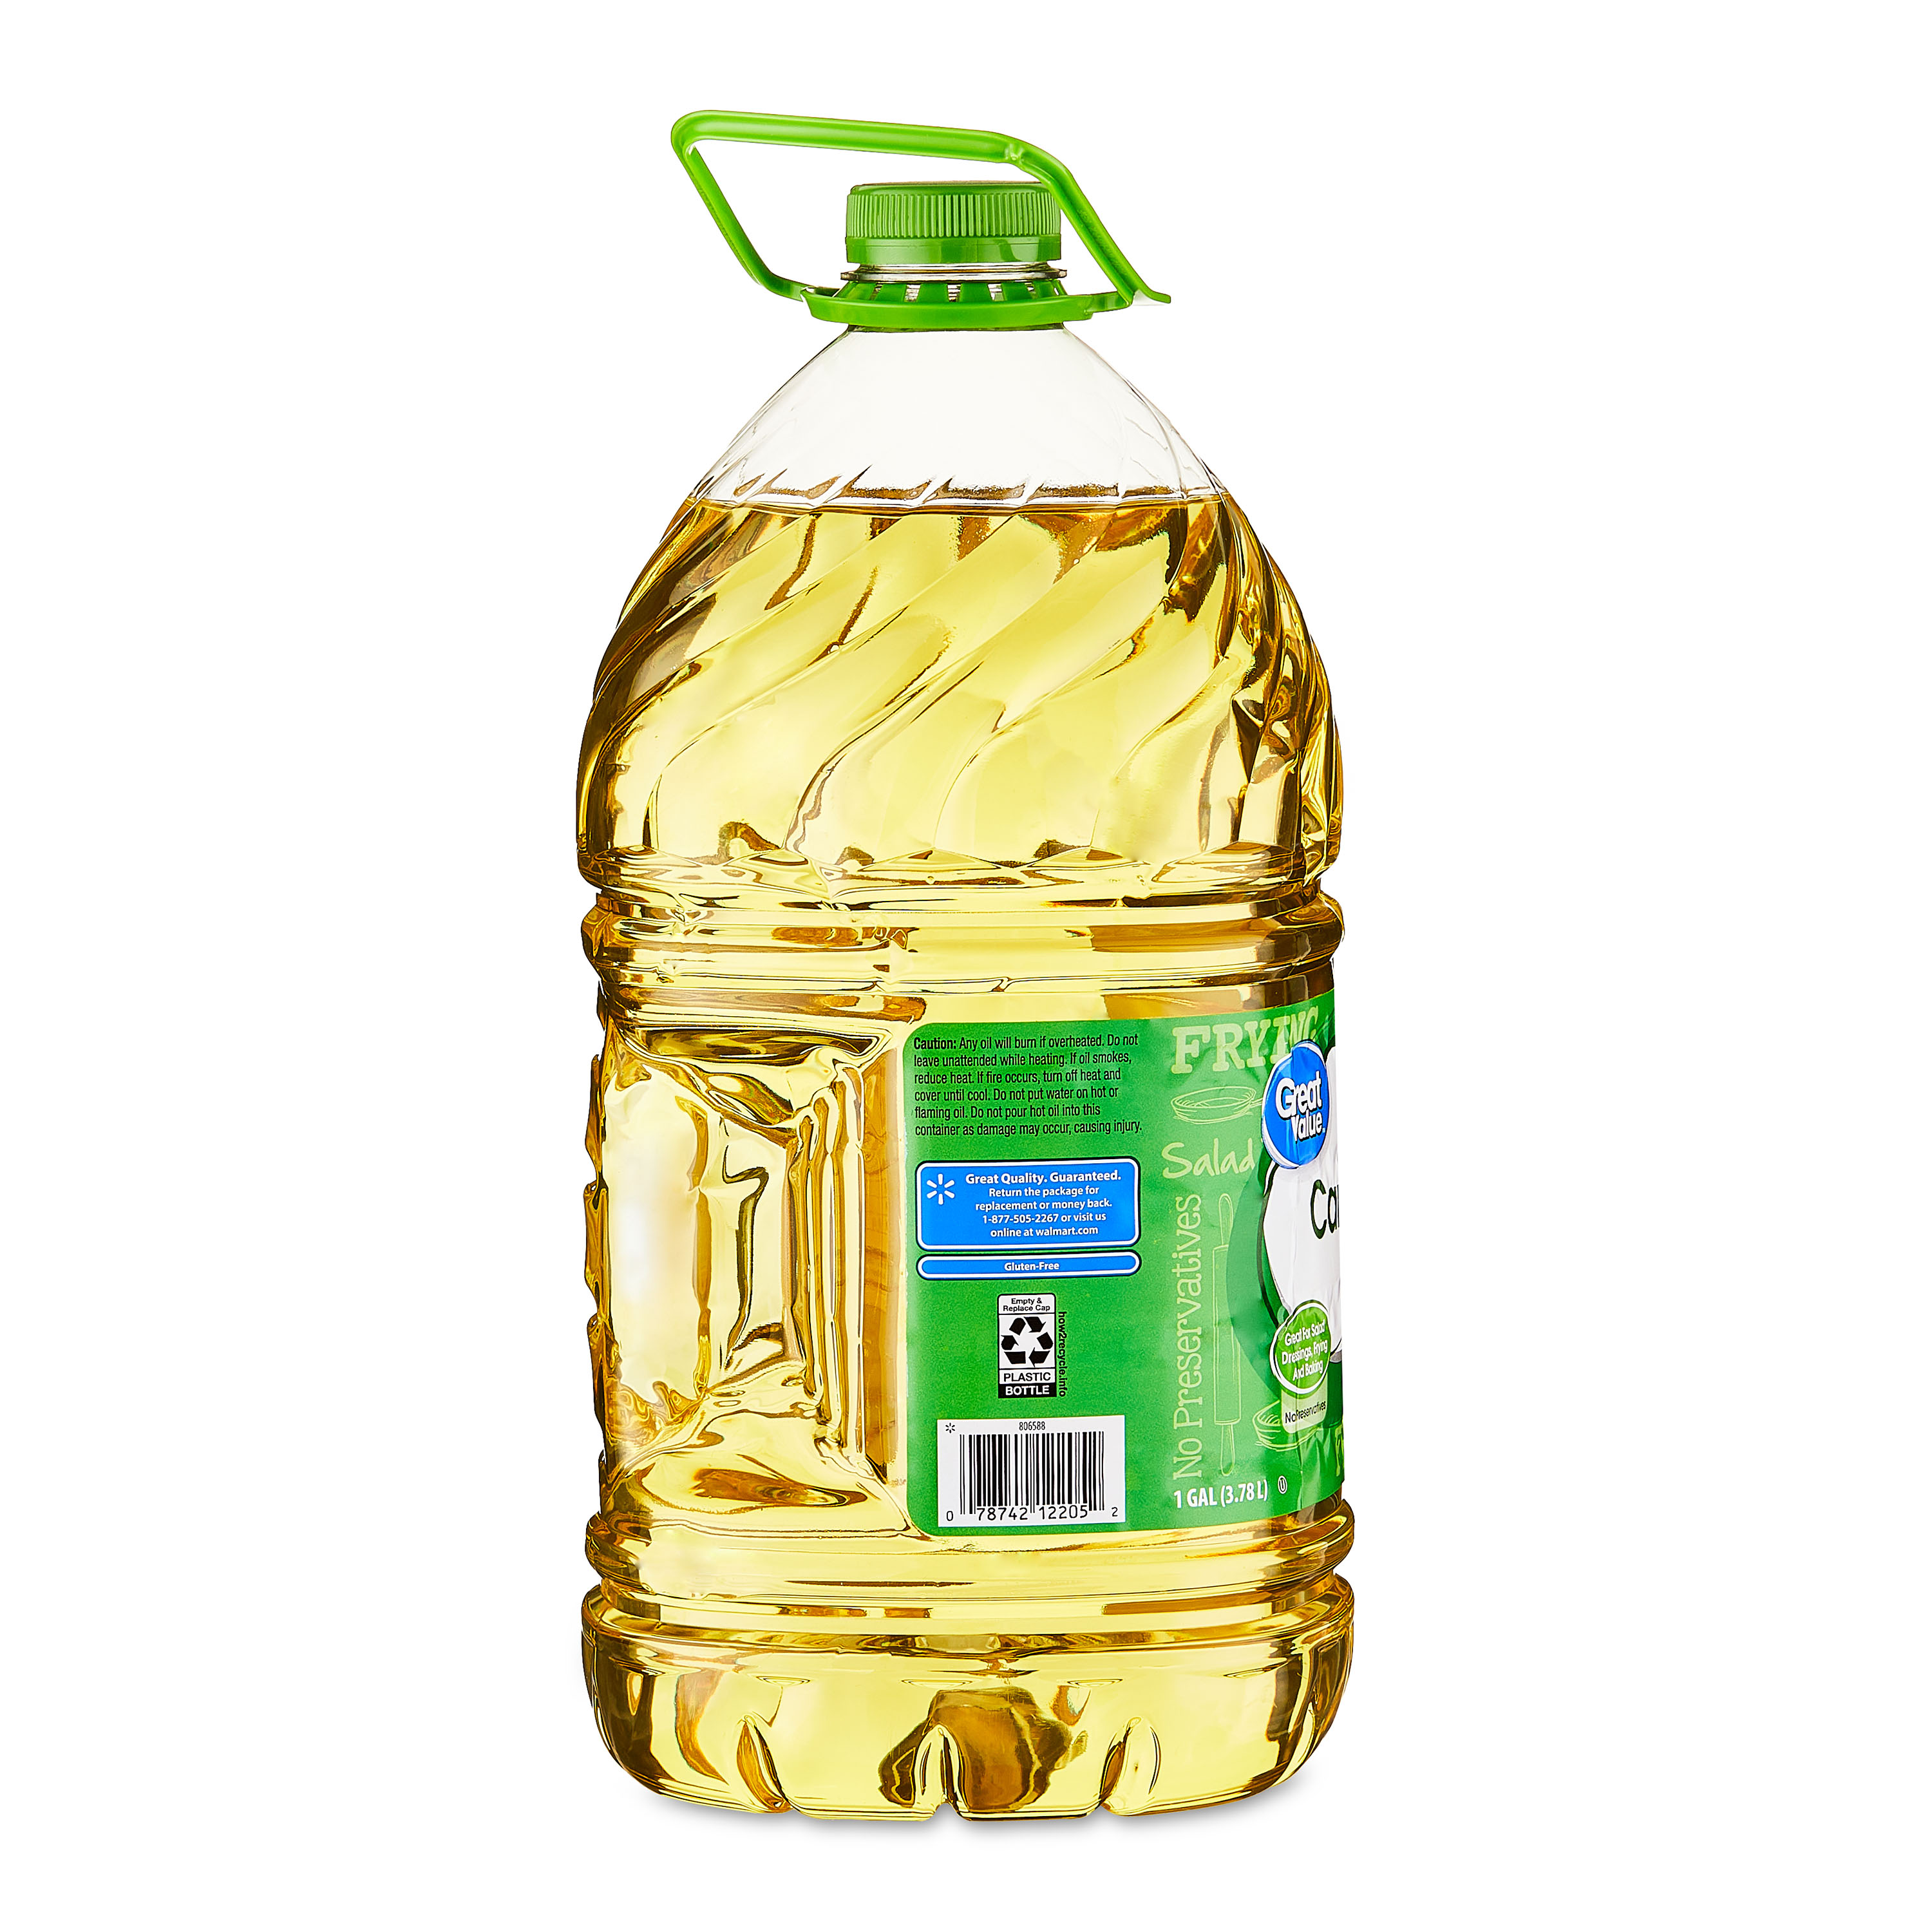 Great Value Canola Oil, 1 gal - image 5 of 7